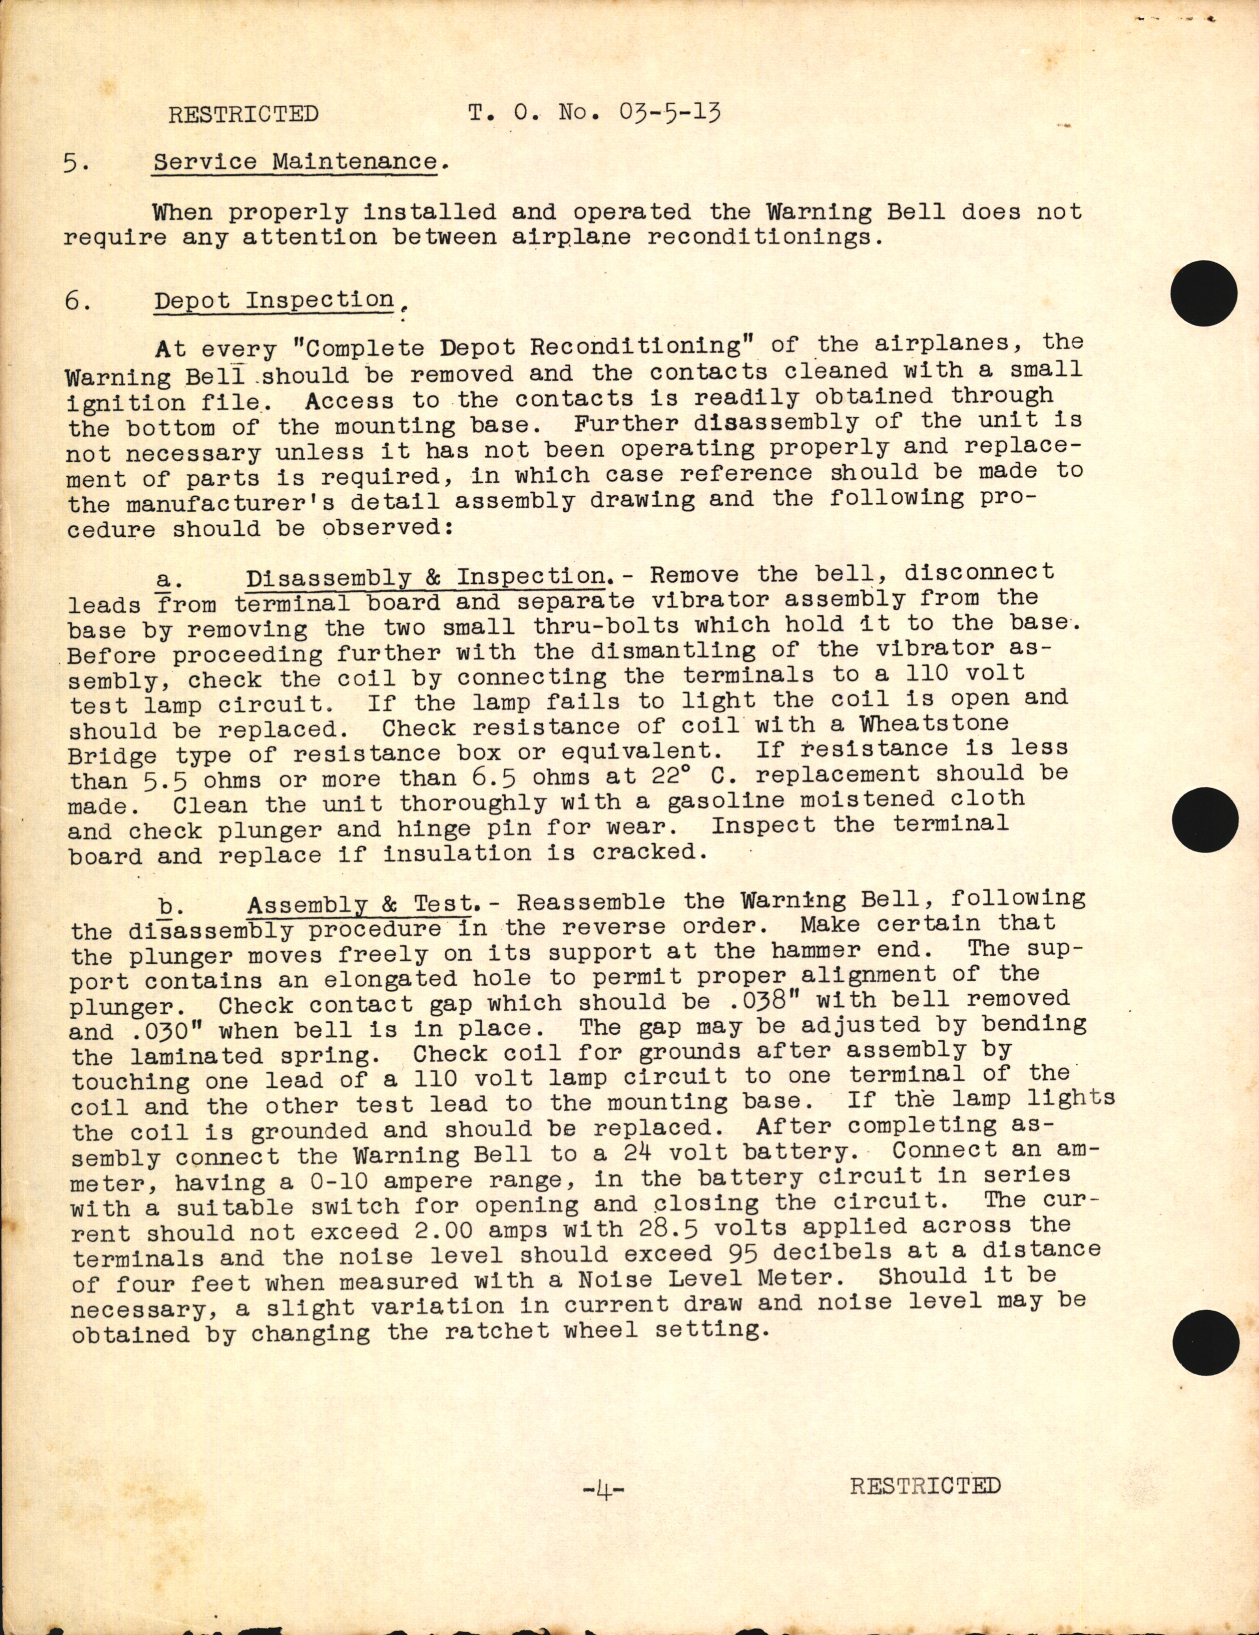 Sample page 6 from AirCorps Library document: Handbook of Instructions for Warning Bells